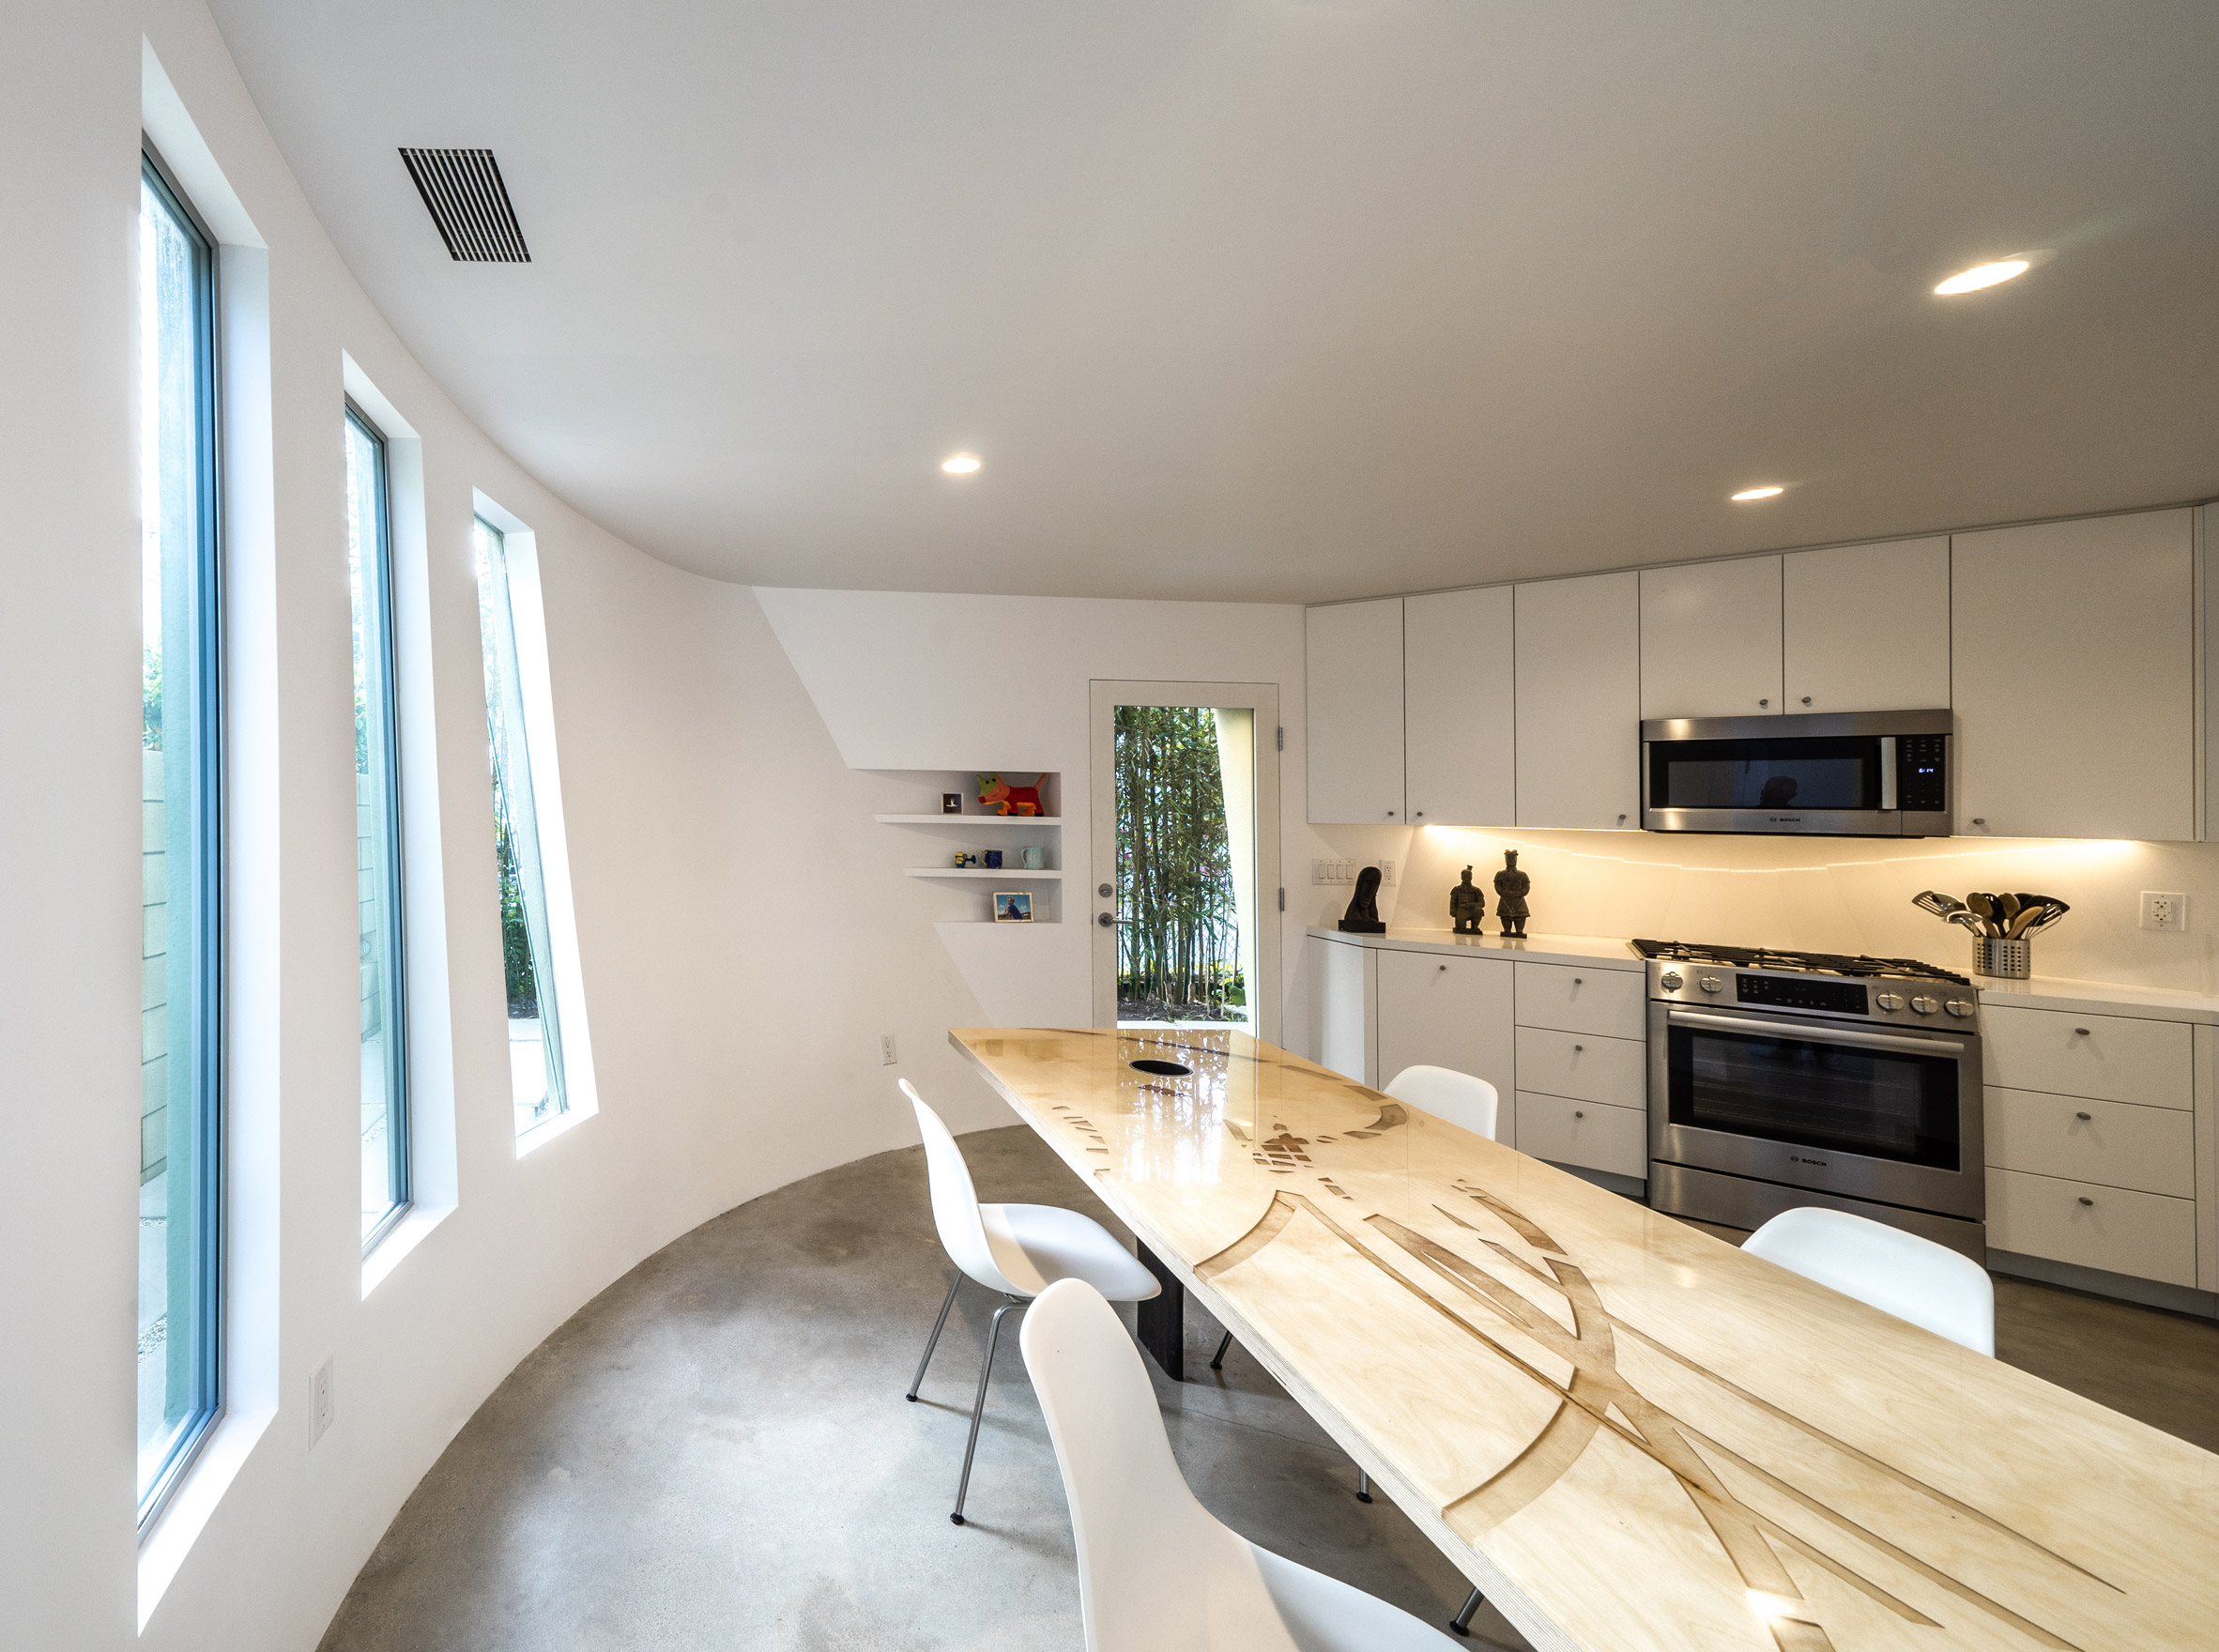 Curved kitchen and dining space by Eric Owen Moss